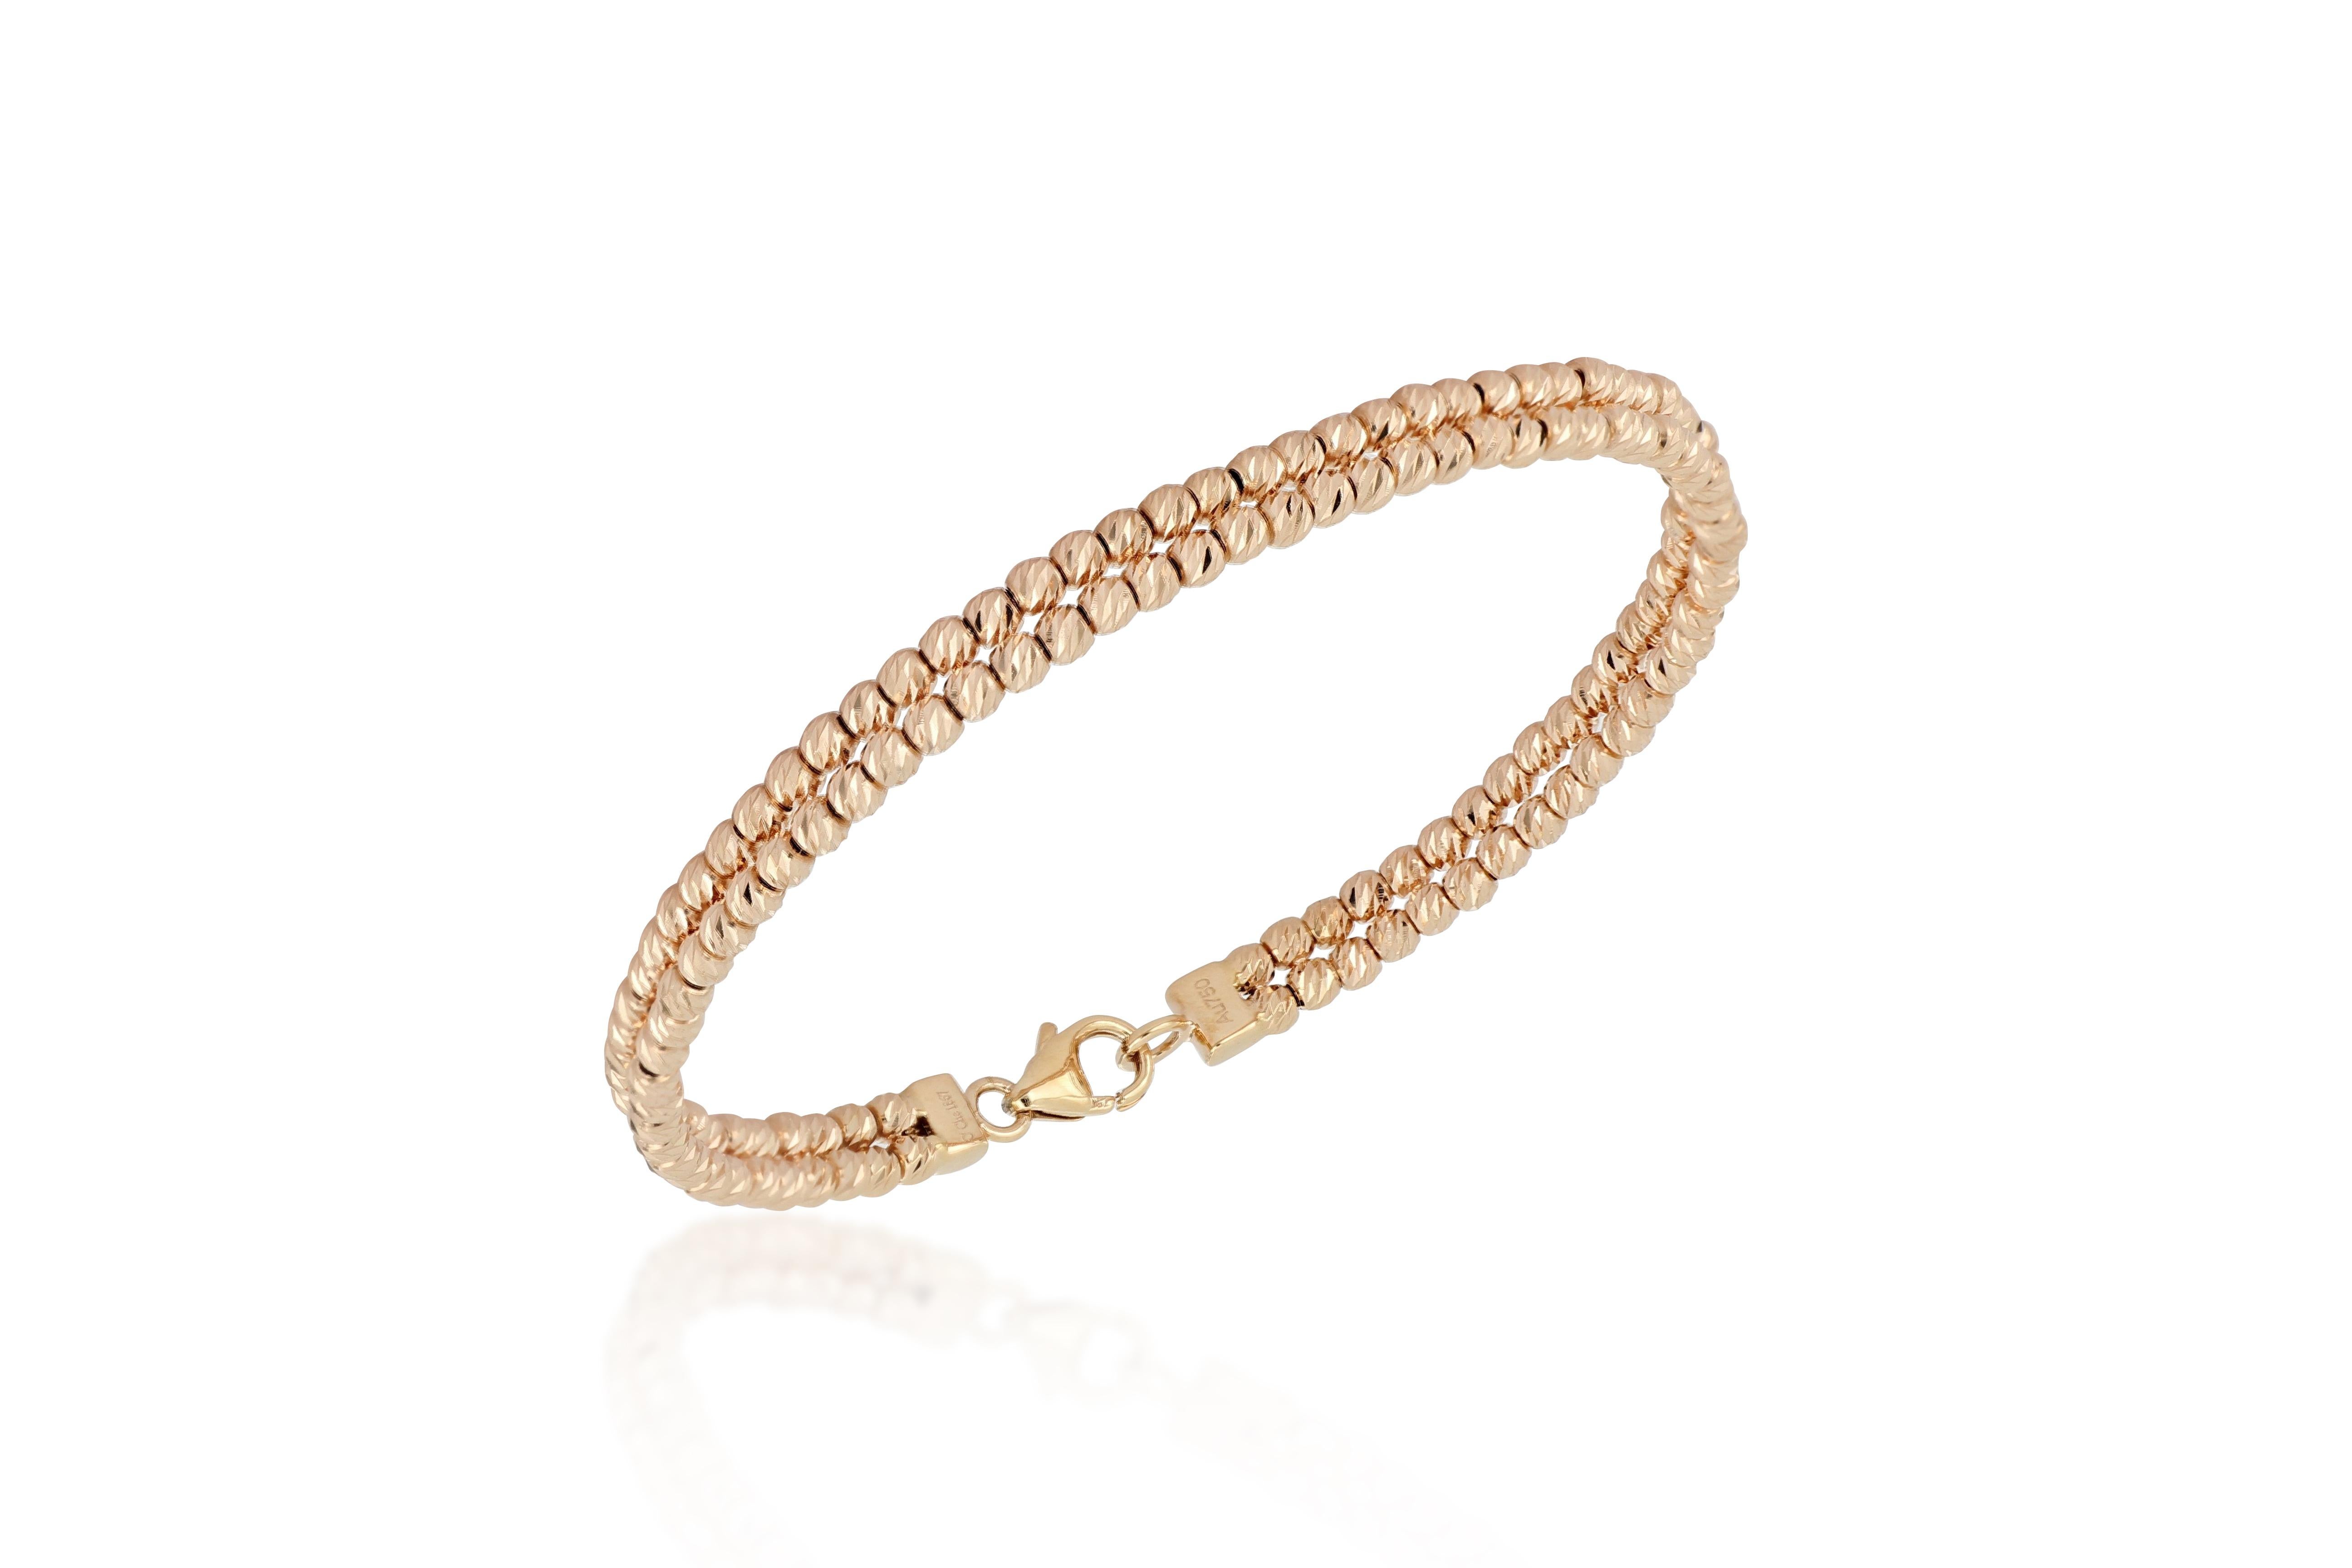 18 Karat Rose Gold Bangle with Sparkling Diamond-cut Beads In New Condition For Sale In Macau, MO